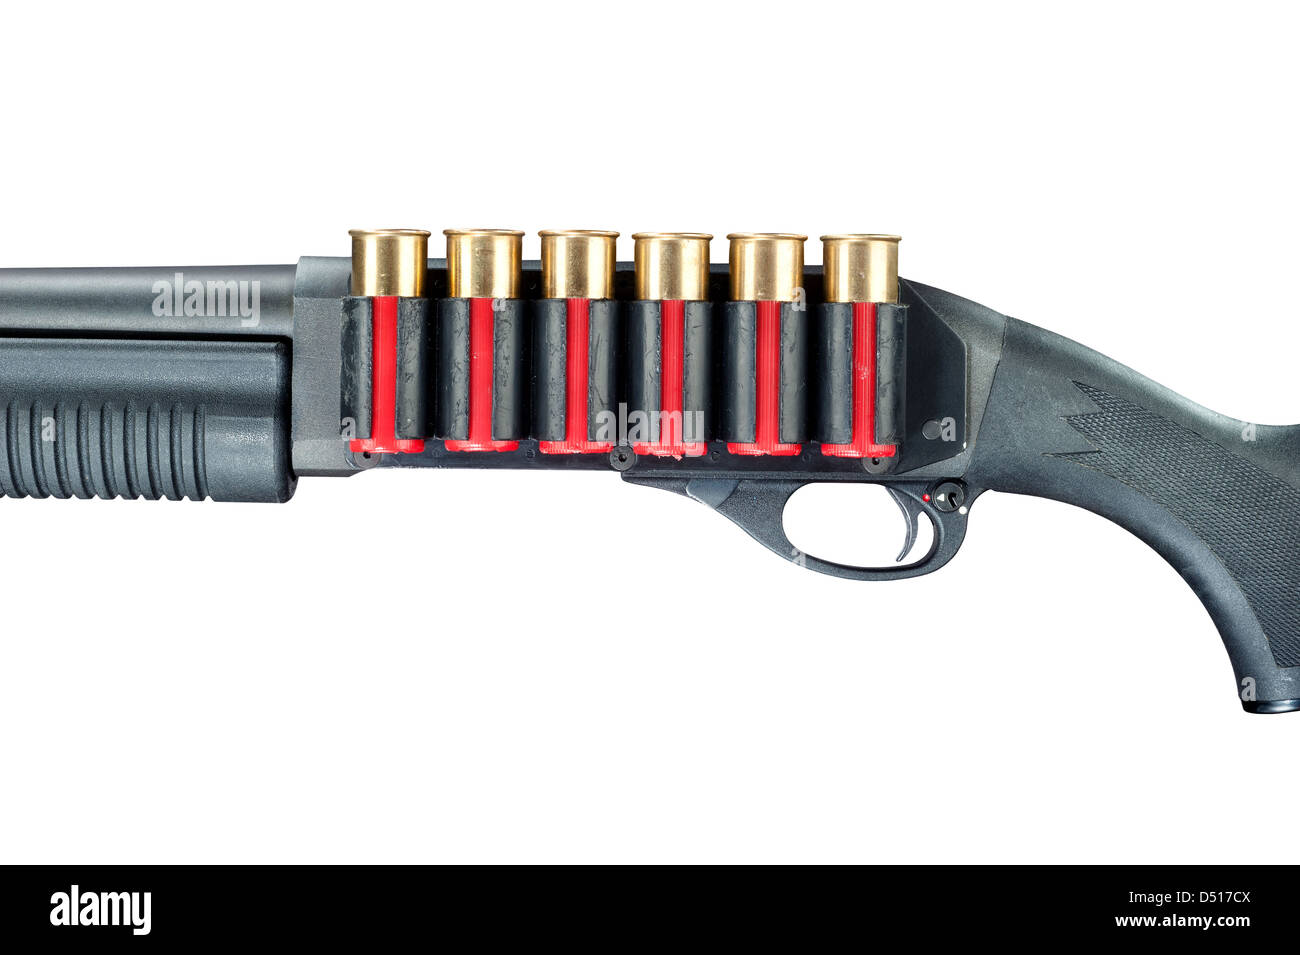 A shotgun with red shell cartridge ammo isolated against a white background. Stock Photo